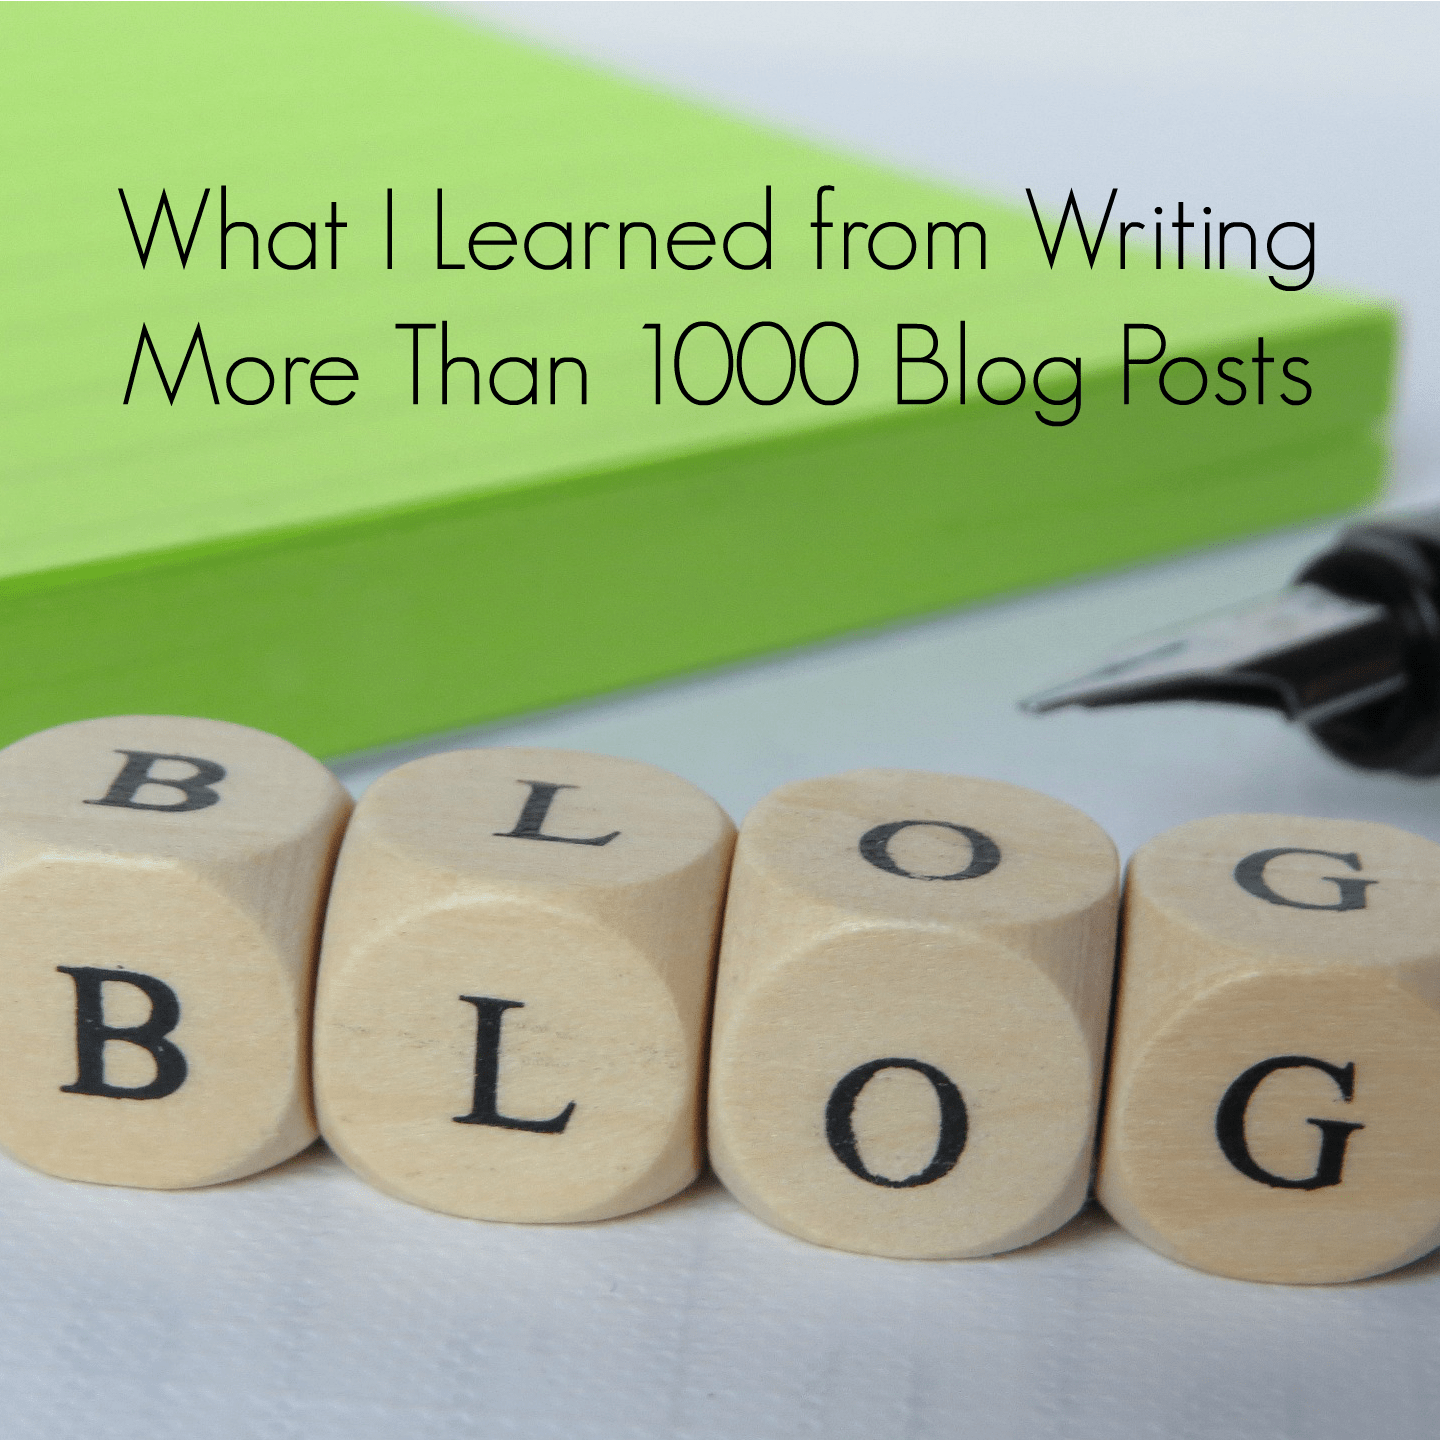 10 Lessons from Writing More Than 1000 Blog Posts